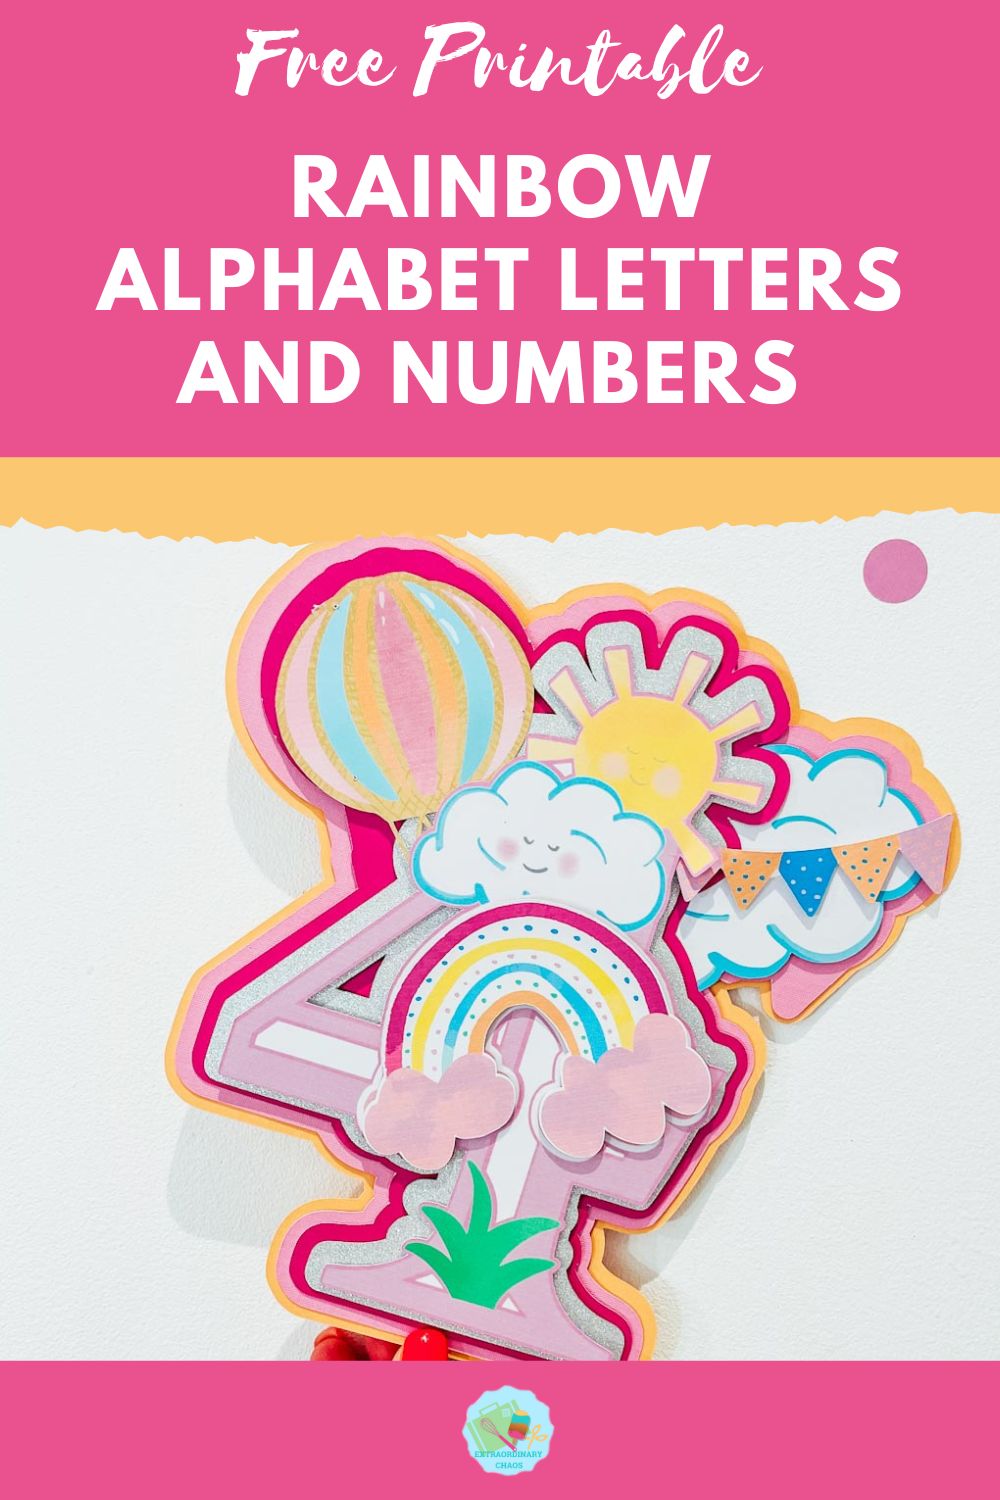 Free printable Rainbow Alphabet letters and numbers-2